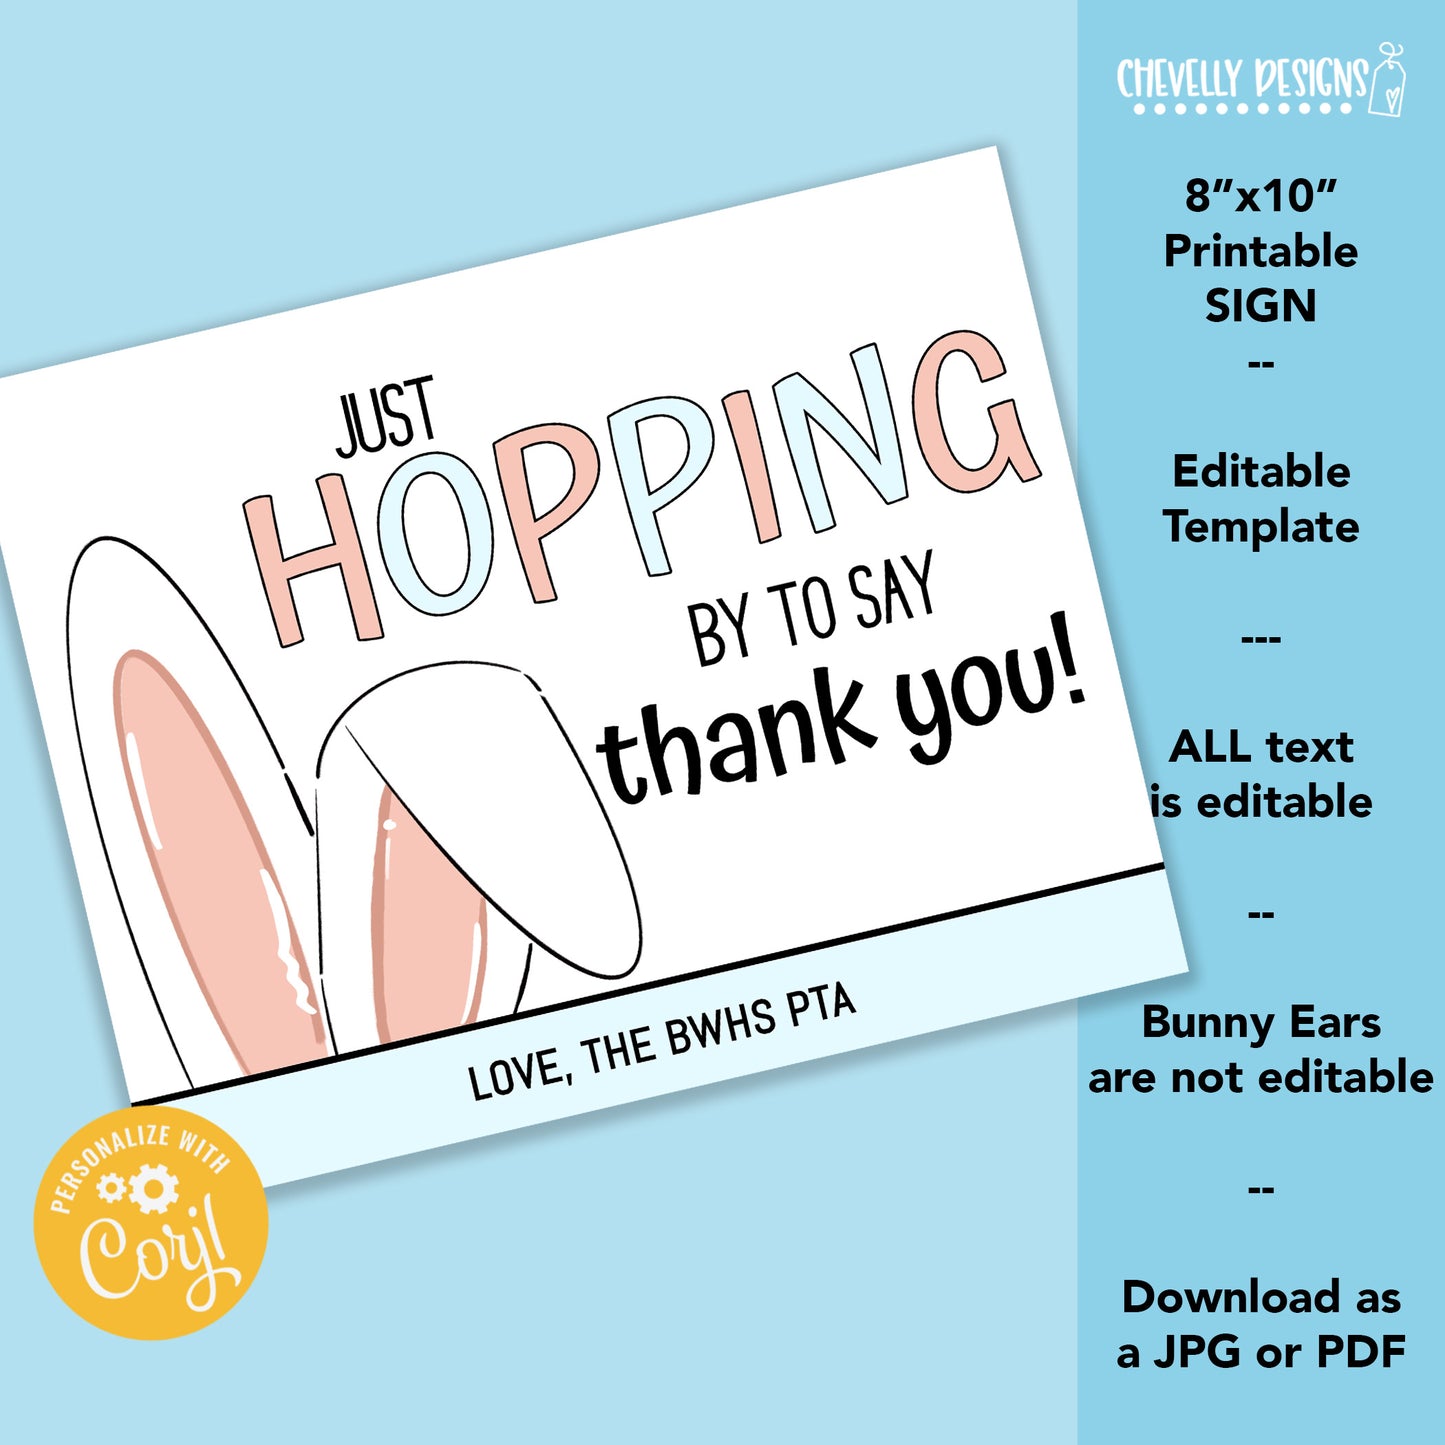 EDITABLE - 8x10 Hopping By to say Thank You - Printable Easter Staff Appreciation Sign